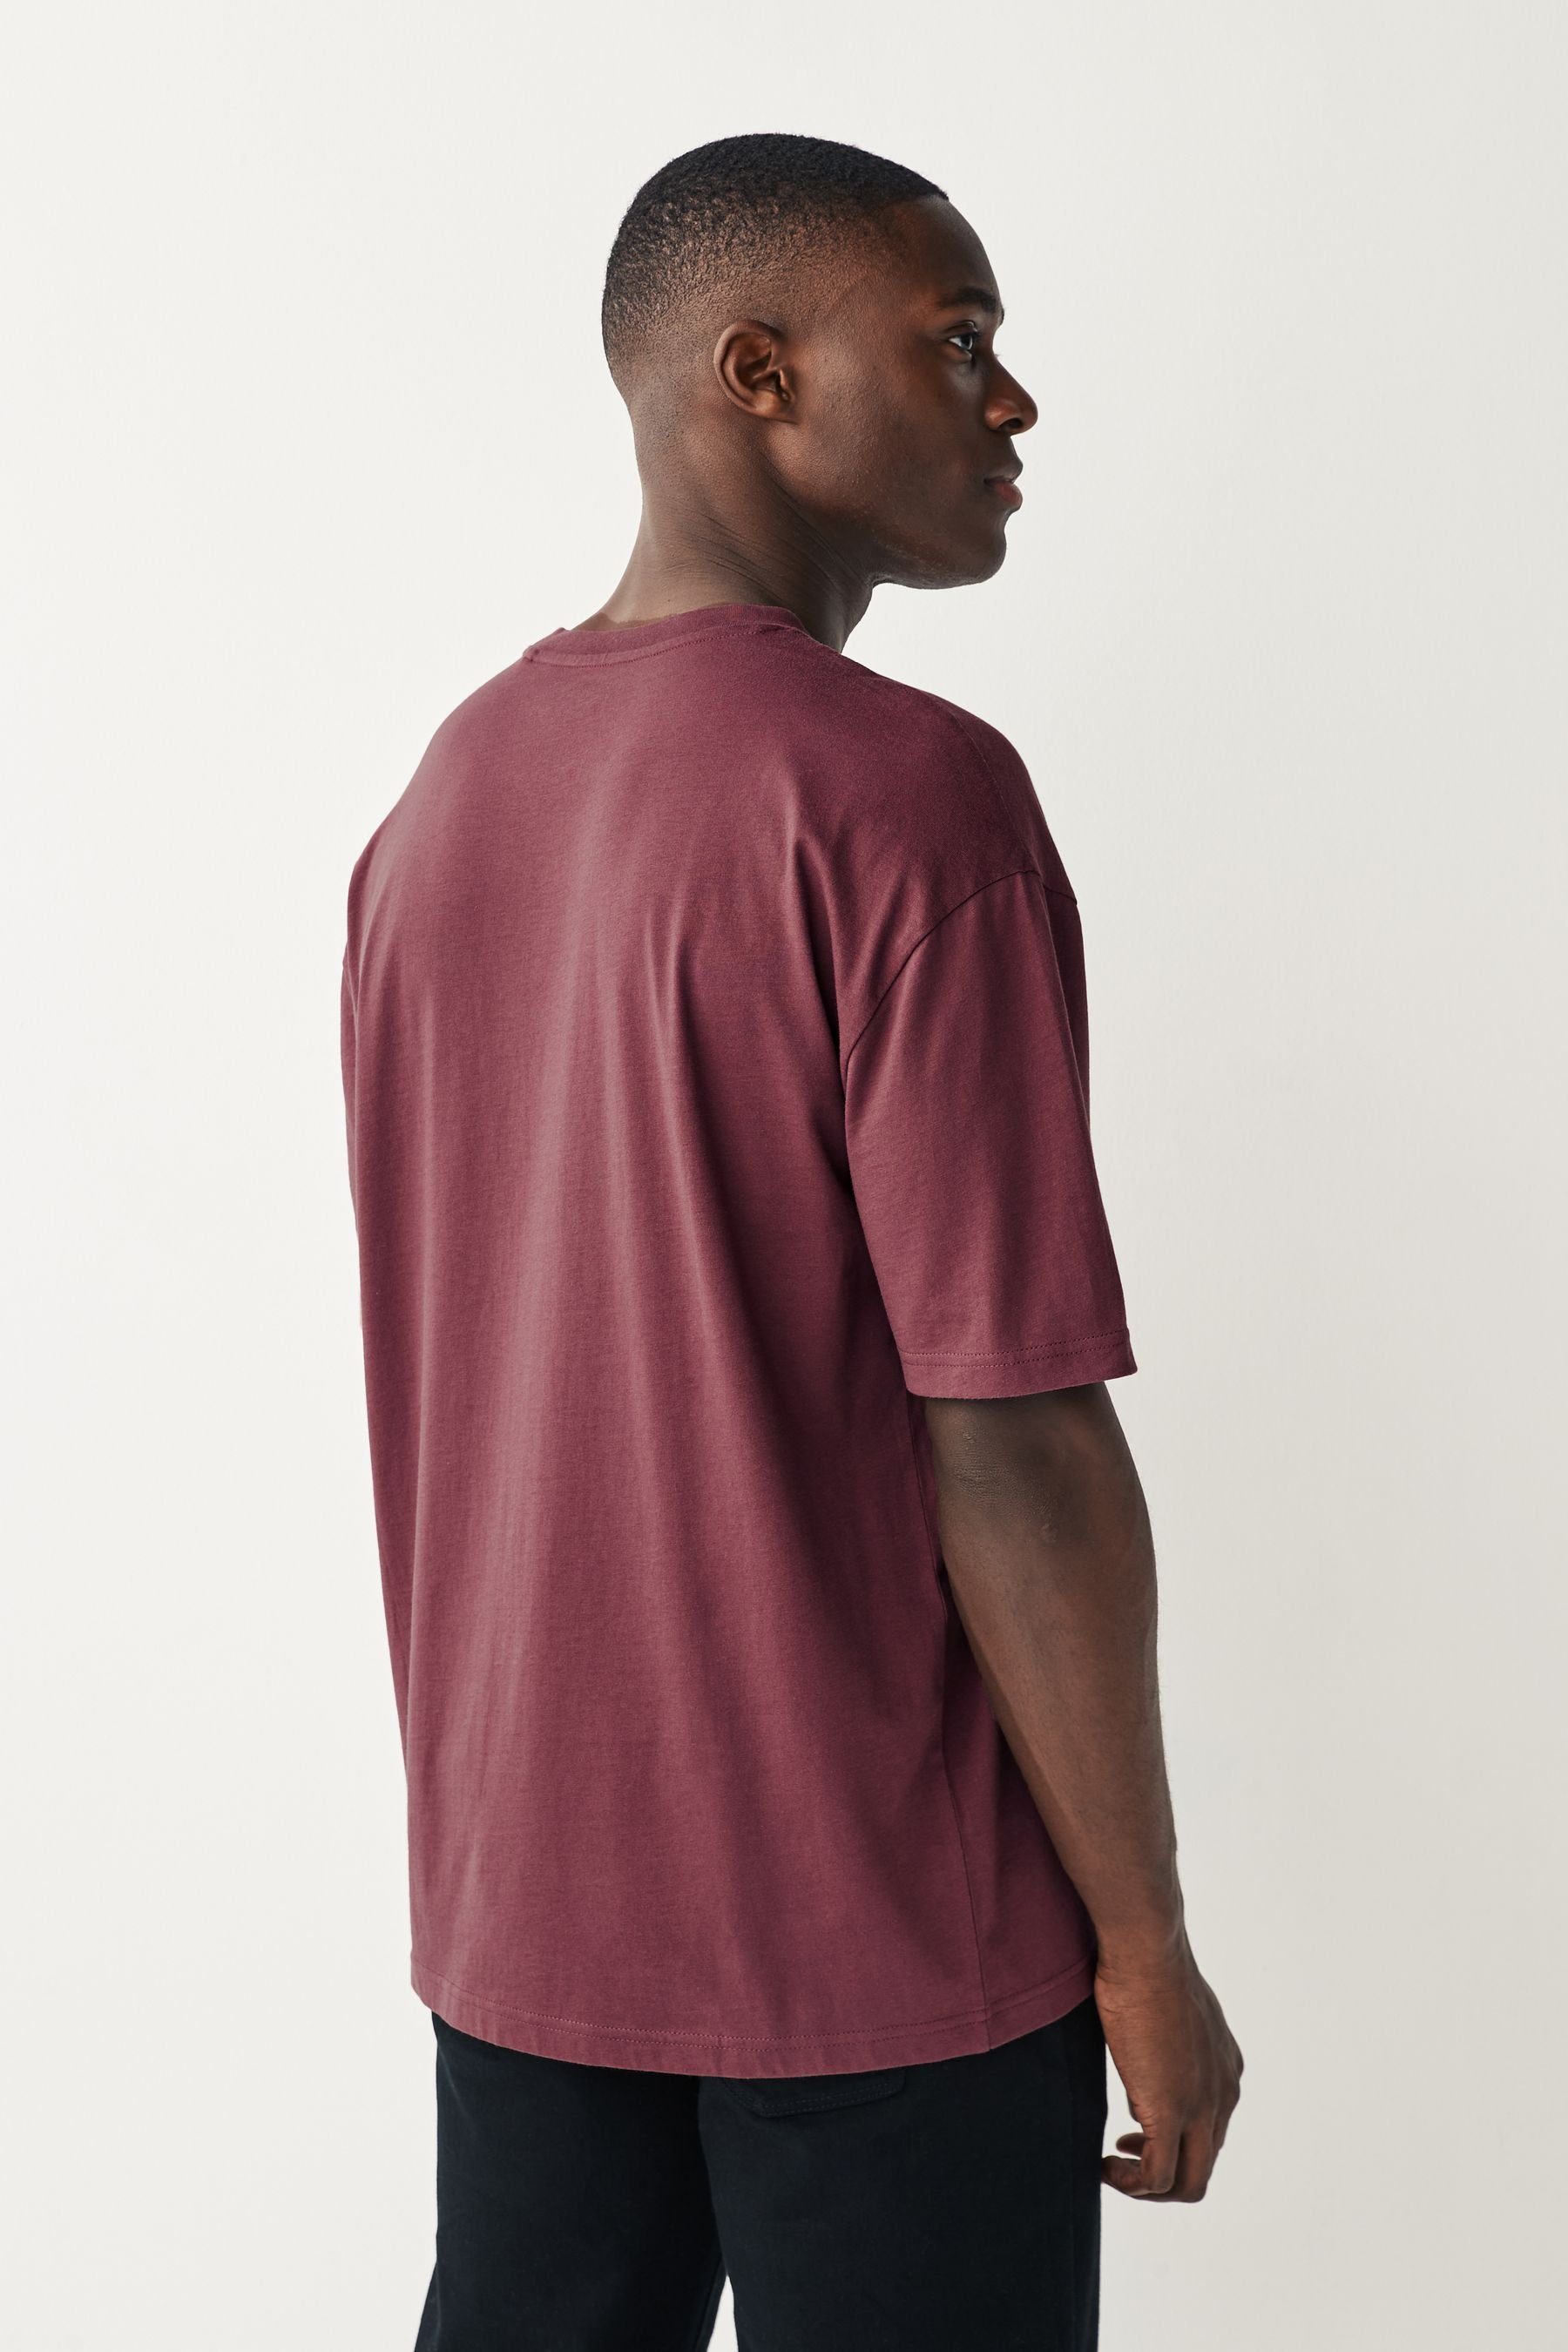 Next T-Shirt Rundhals-T-Shirt im (1-tlg) Relaxed Fit Purple